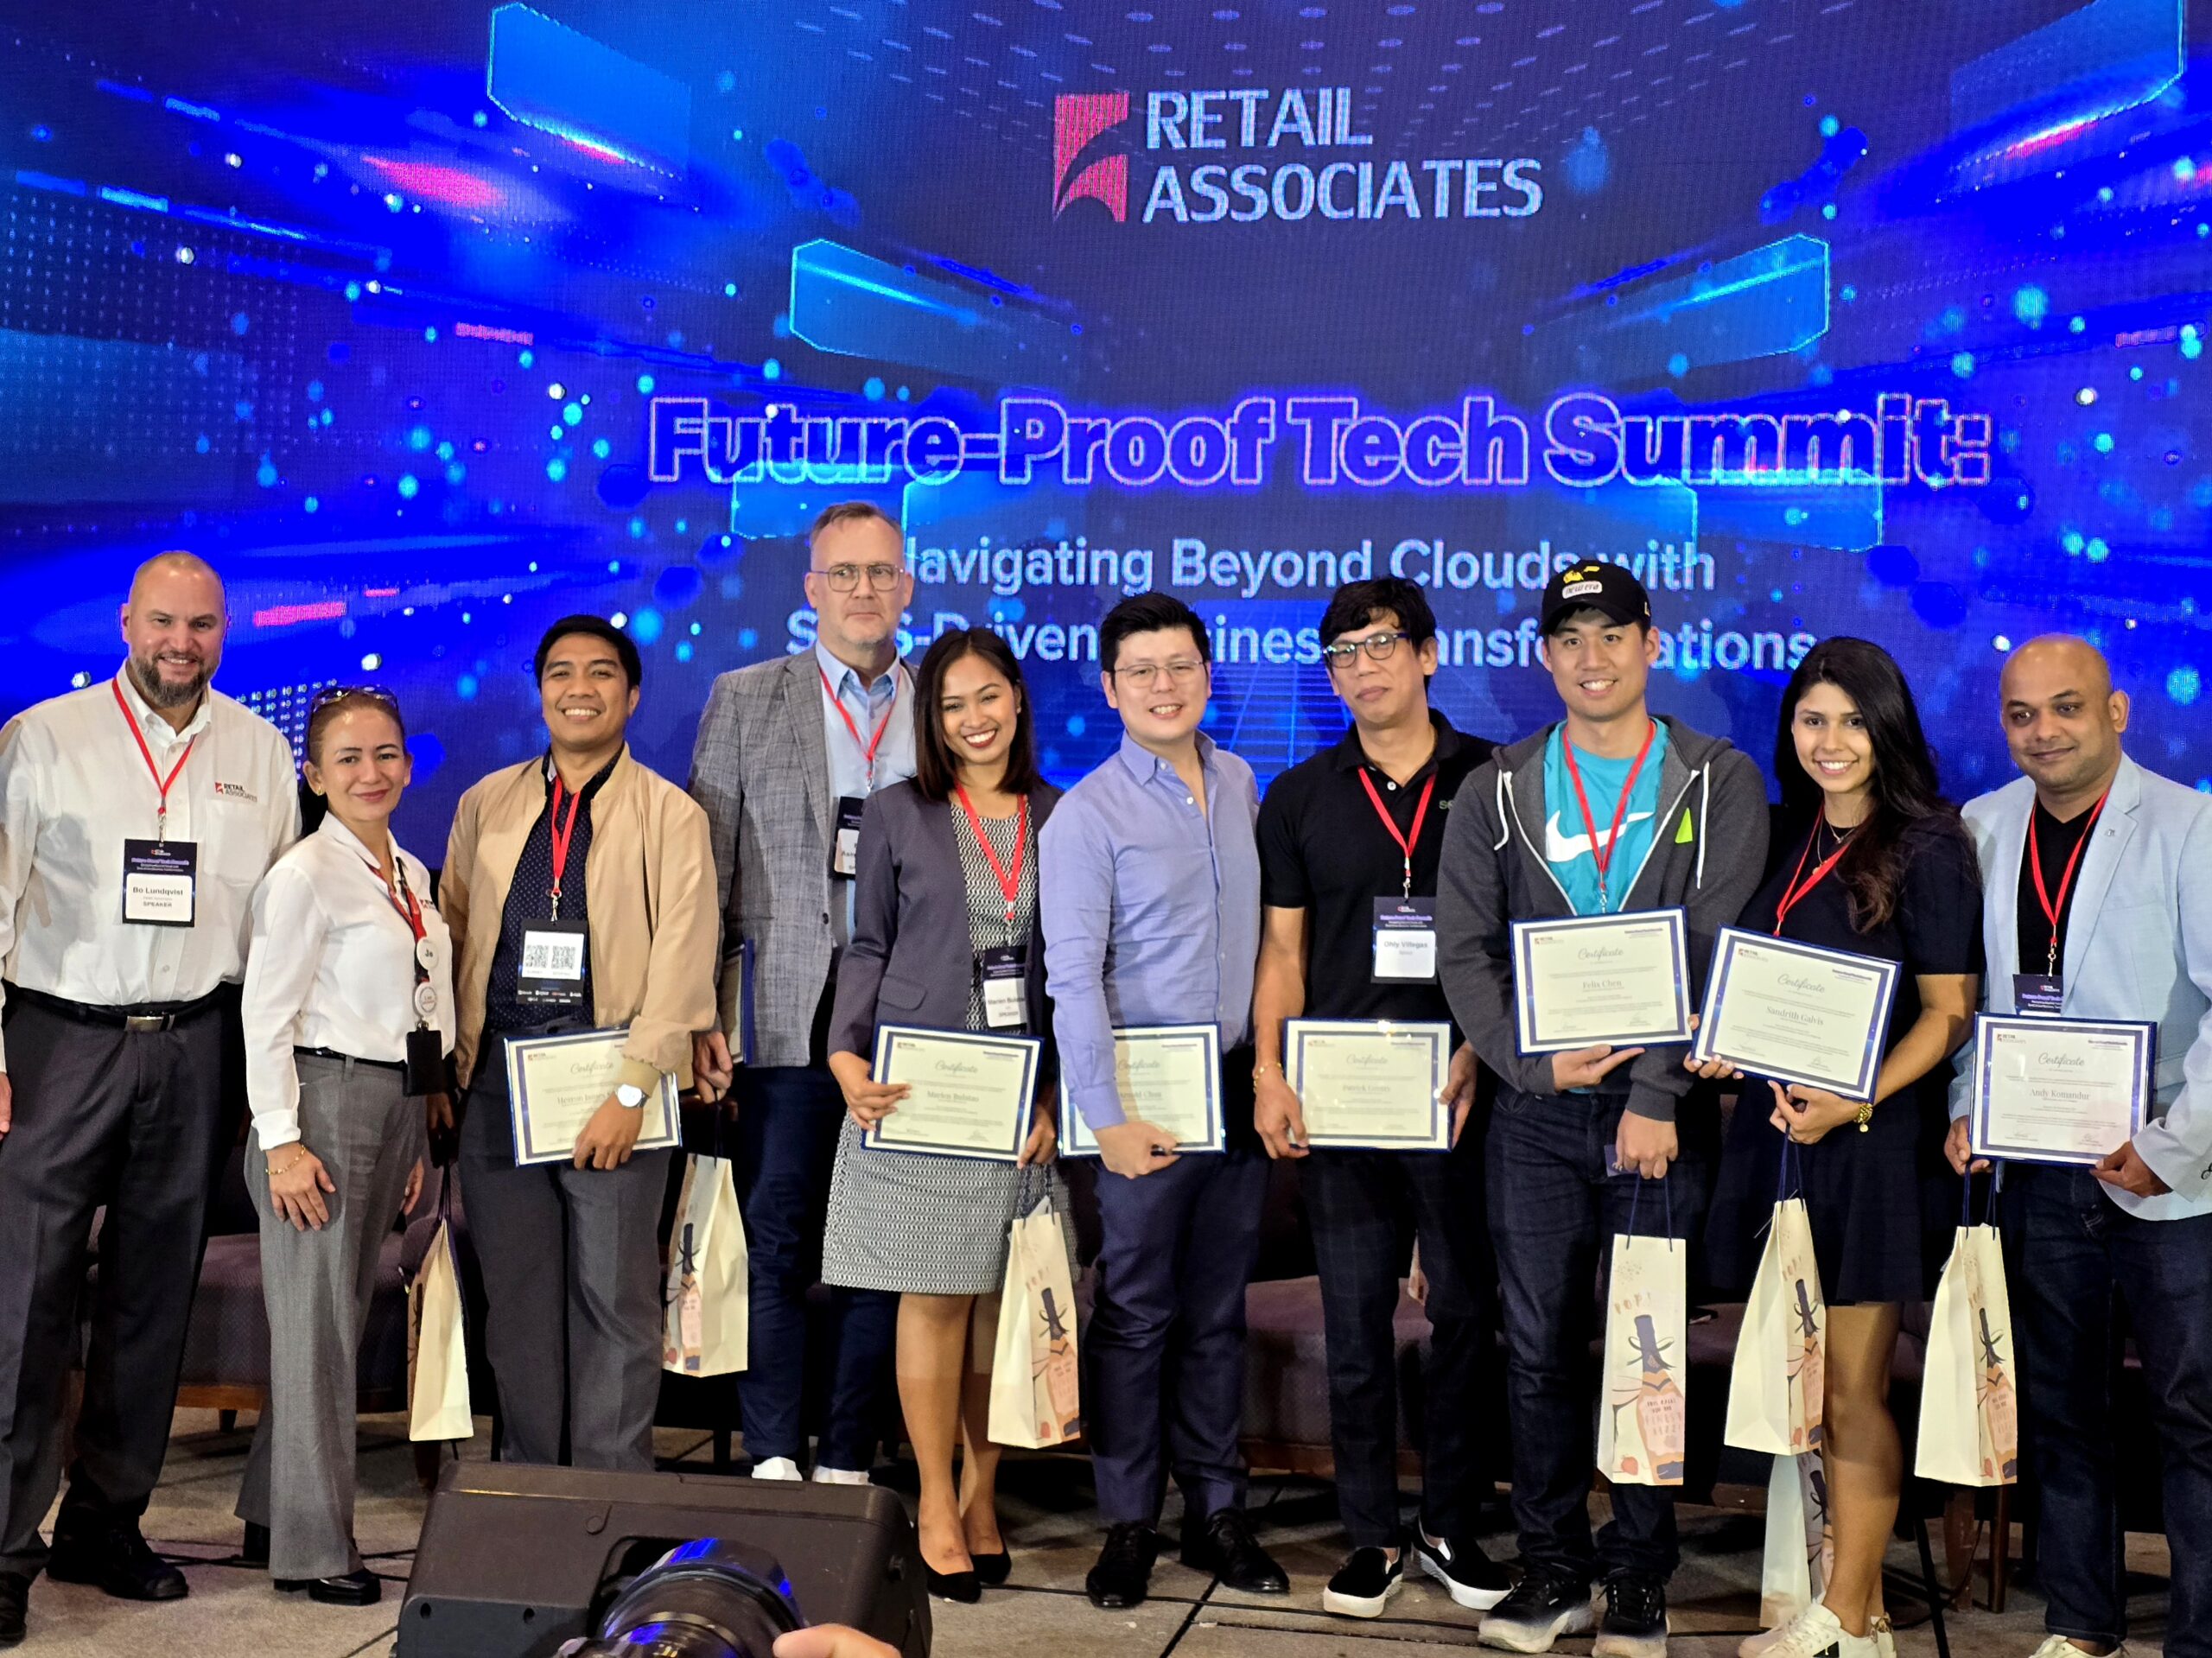 Retail Associates Kick Off the Future-Proof Tech Summit Navigating Beyond Clouds with SaaS-Driven Business Transformations